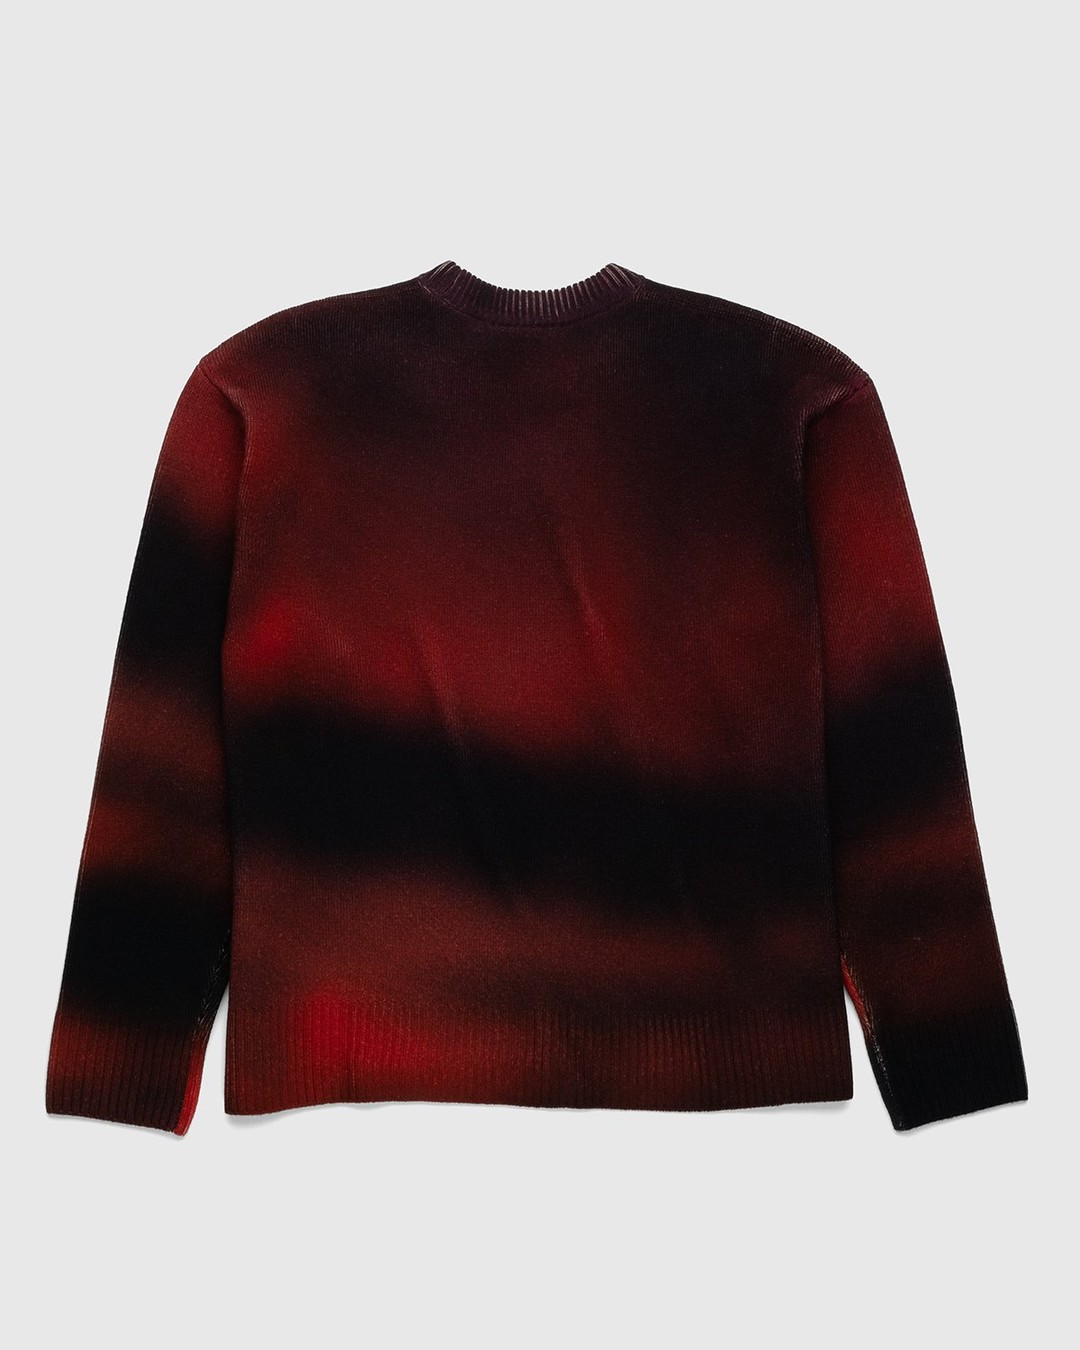 A-Cold-Wall* – Digital Print Knit Red - Knitwear - Red - Image 2